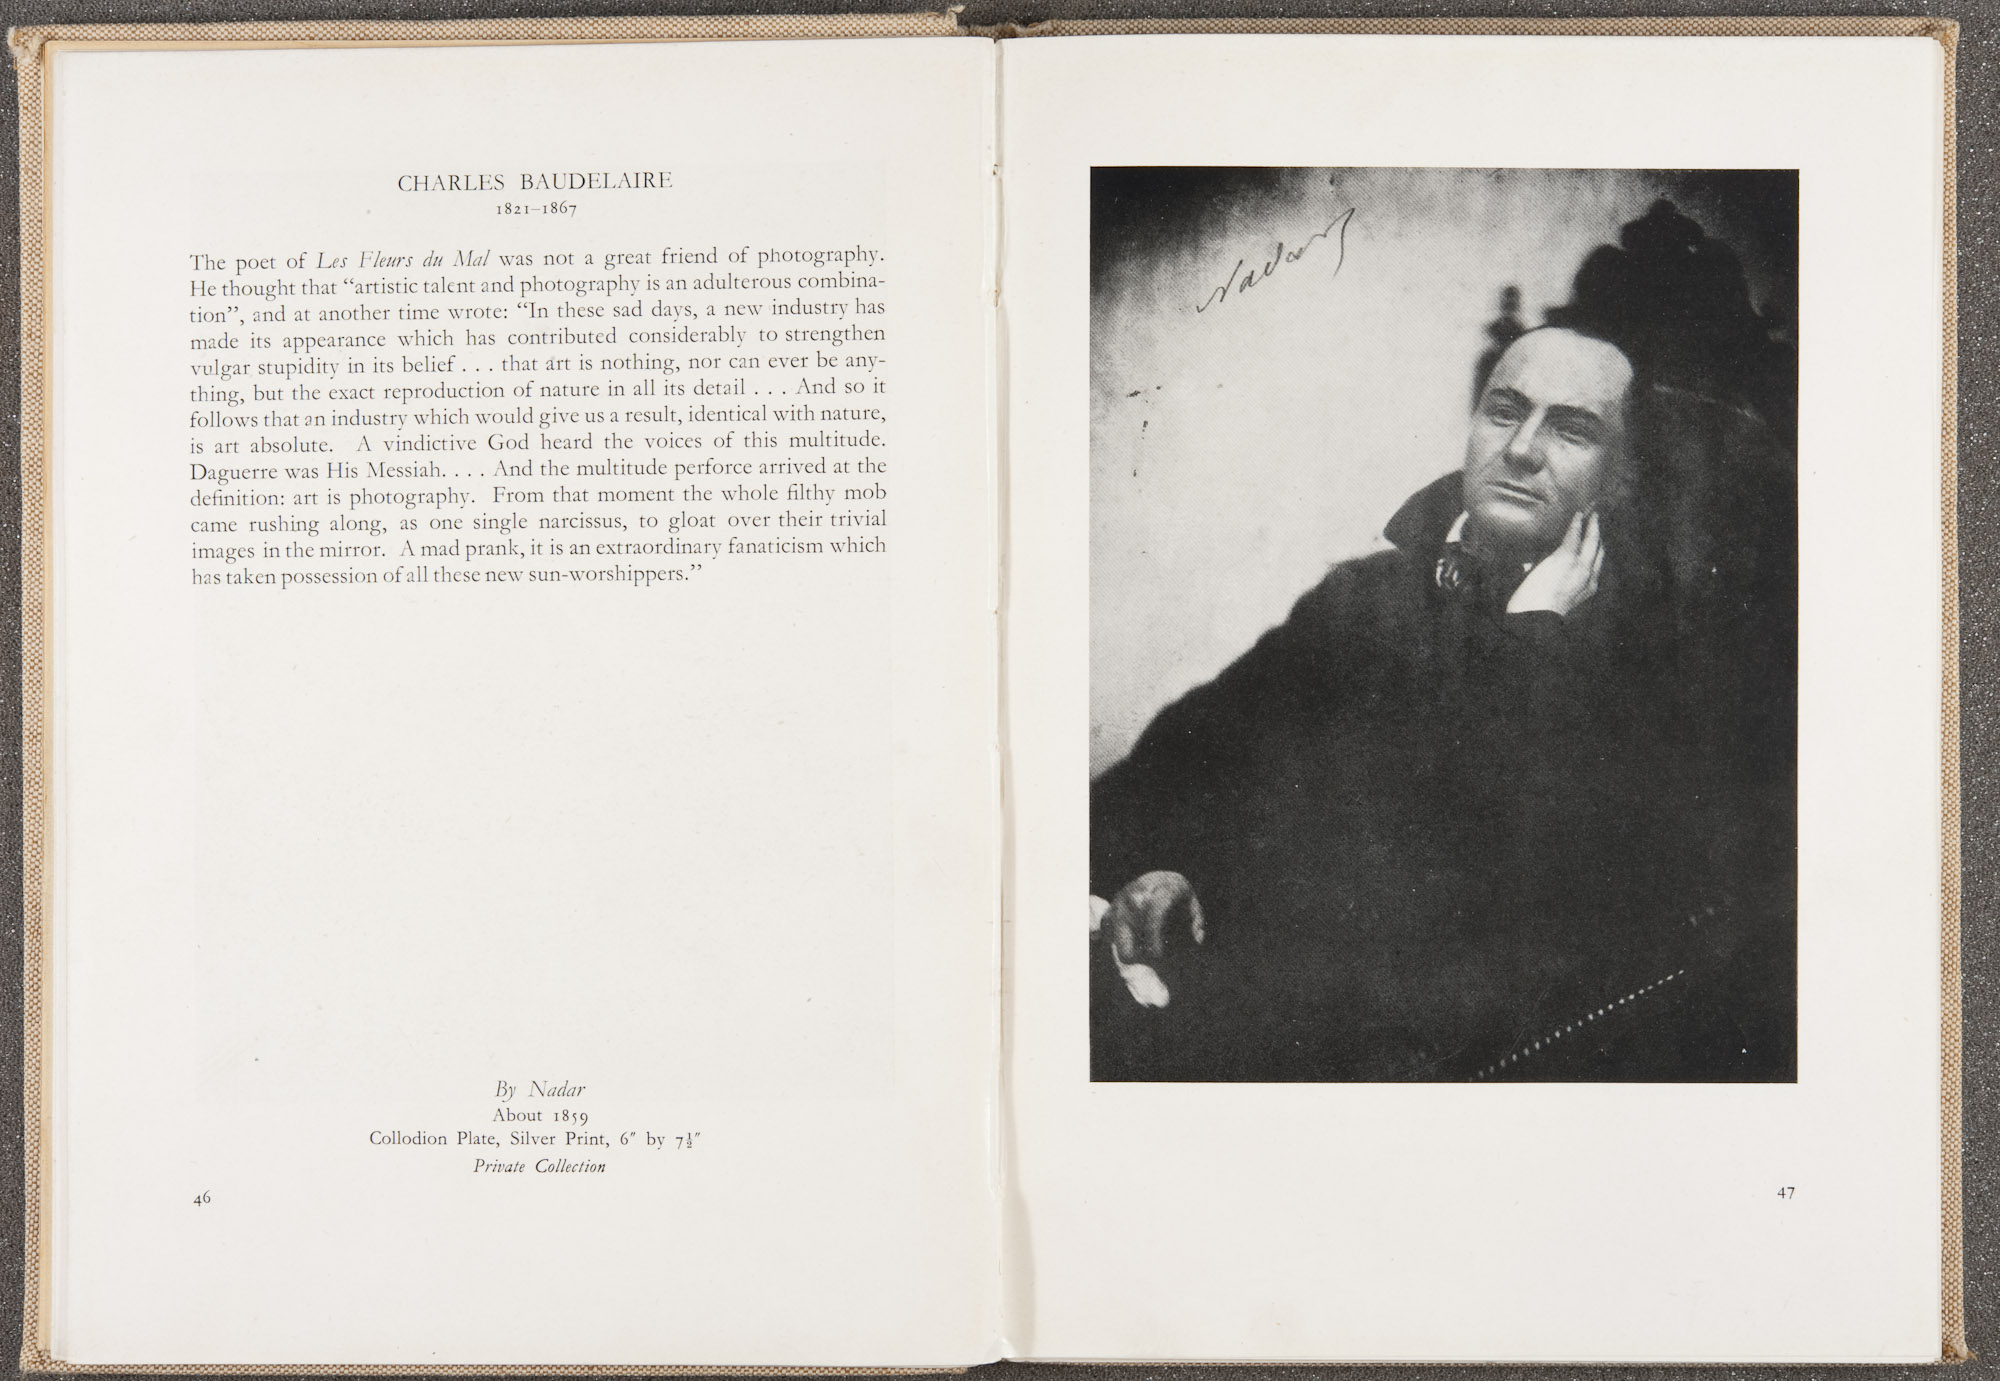 "Charles Baudelaire," by Nadar, ca. 1859, page 46-47